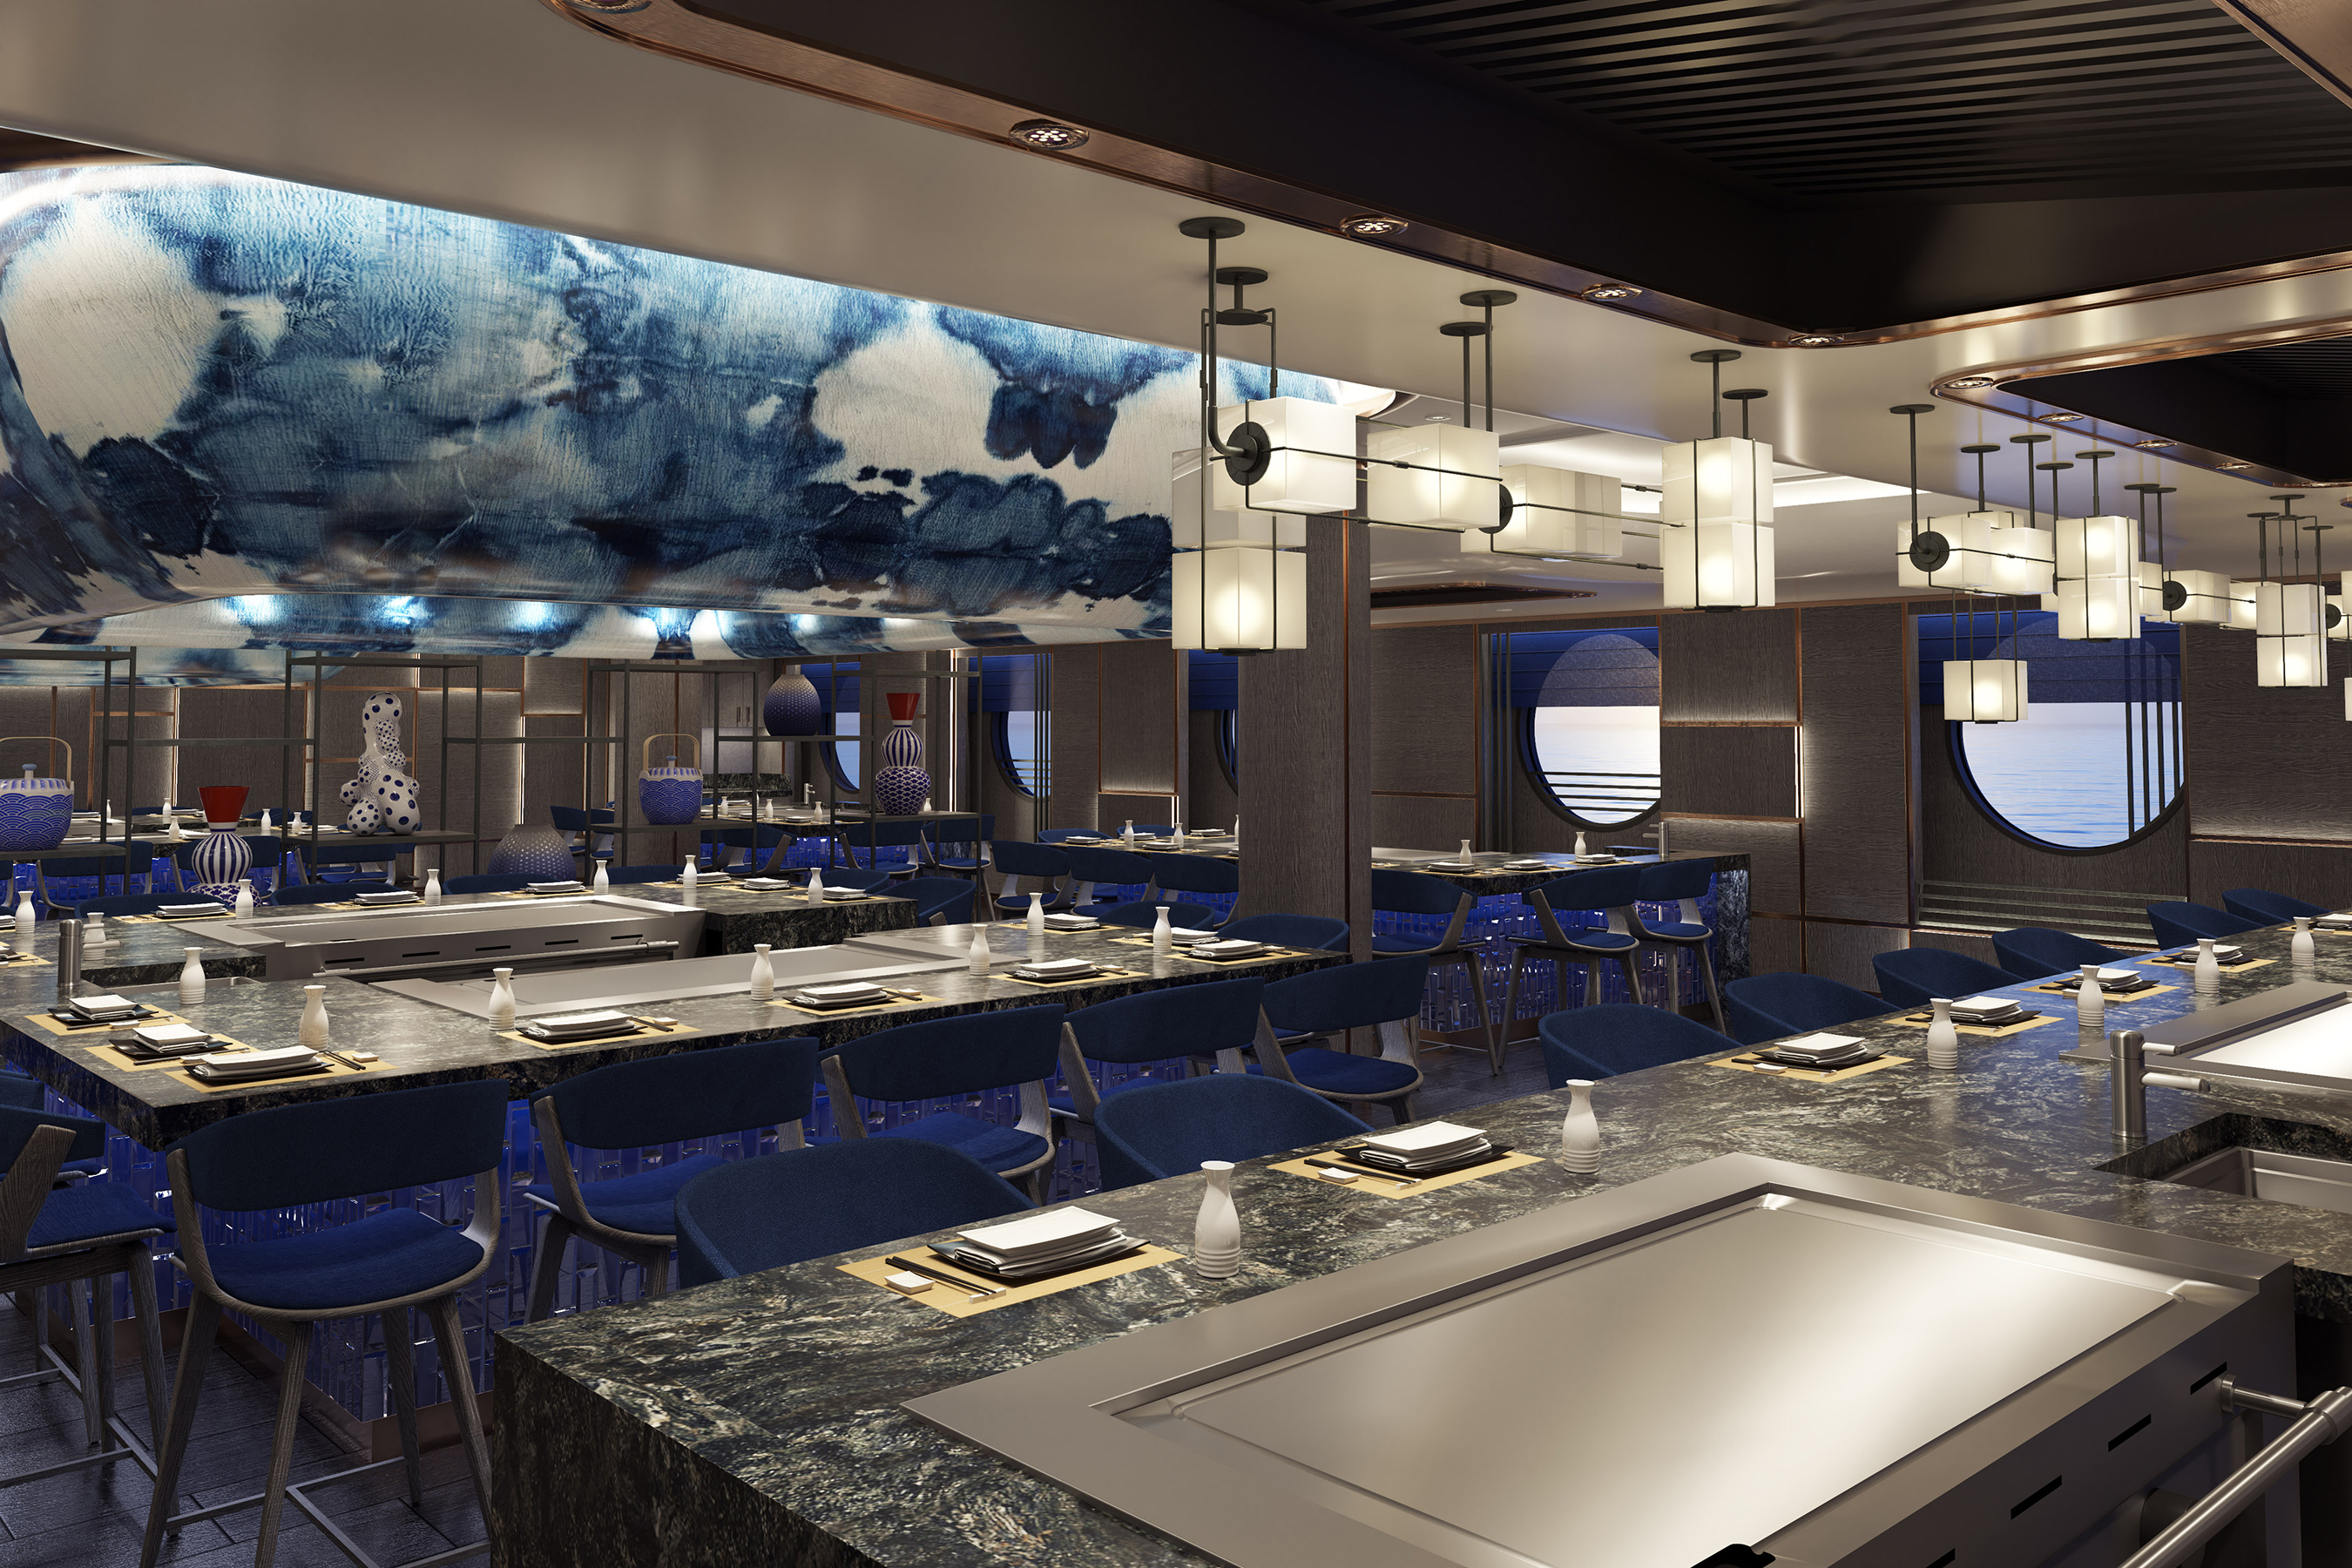 Hasuki, Norwegian Cruise Line’s new elevated take on the traditional "hibachi-style", will boast an intimate space featuring design elements that invite guests into the artisanship of Japanese influence through minimalist decor, handcrafted pottery and featured Japanese artwork.